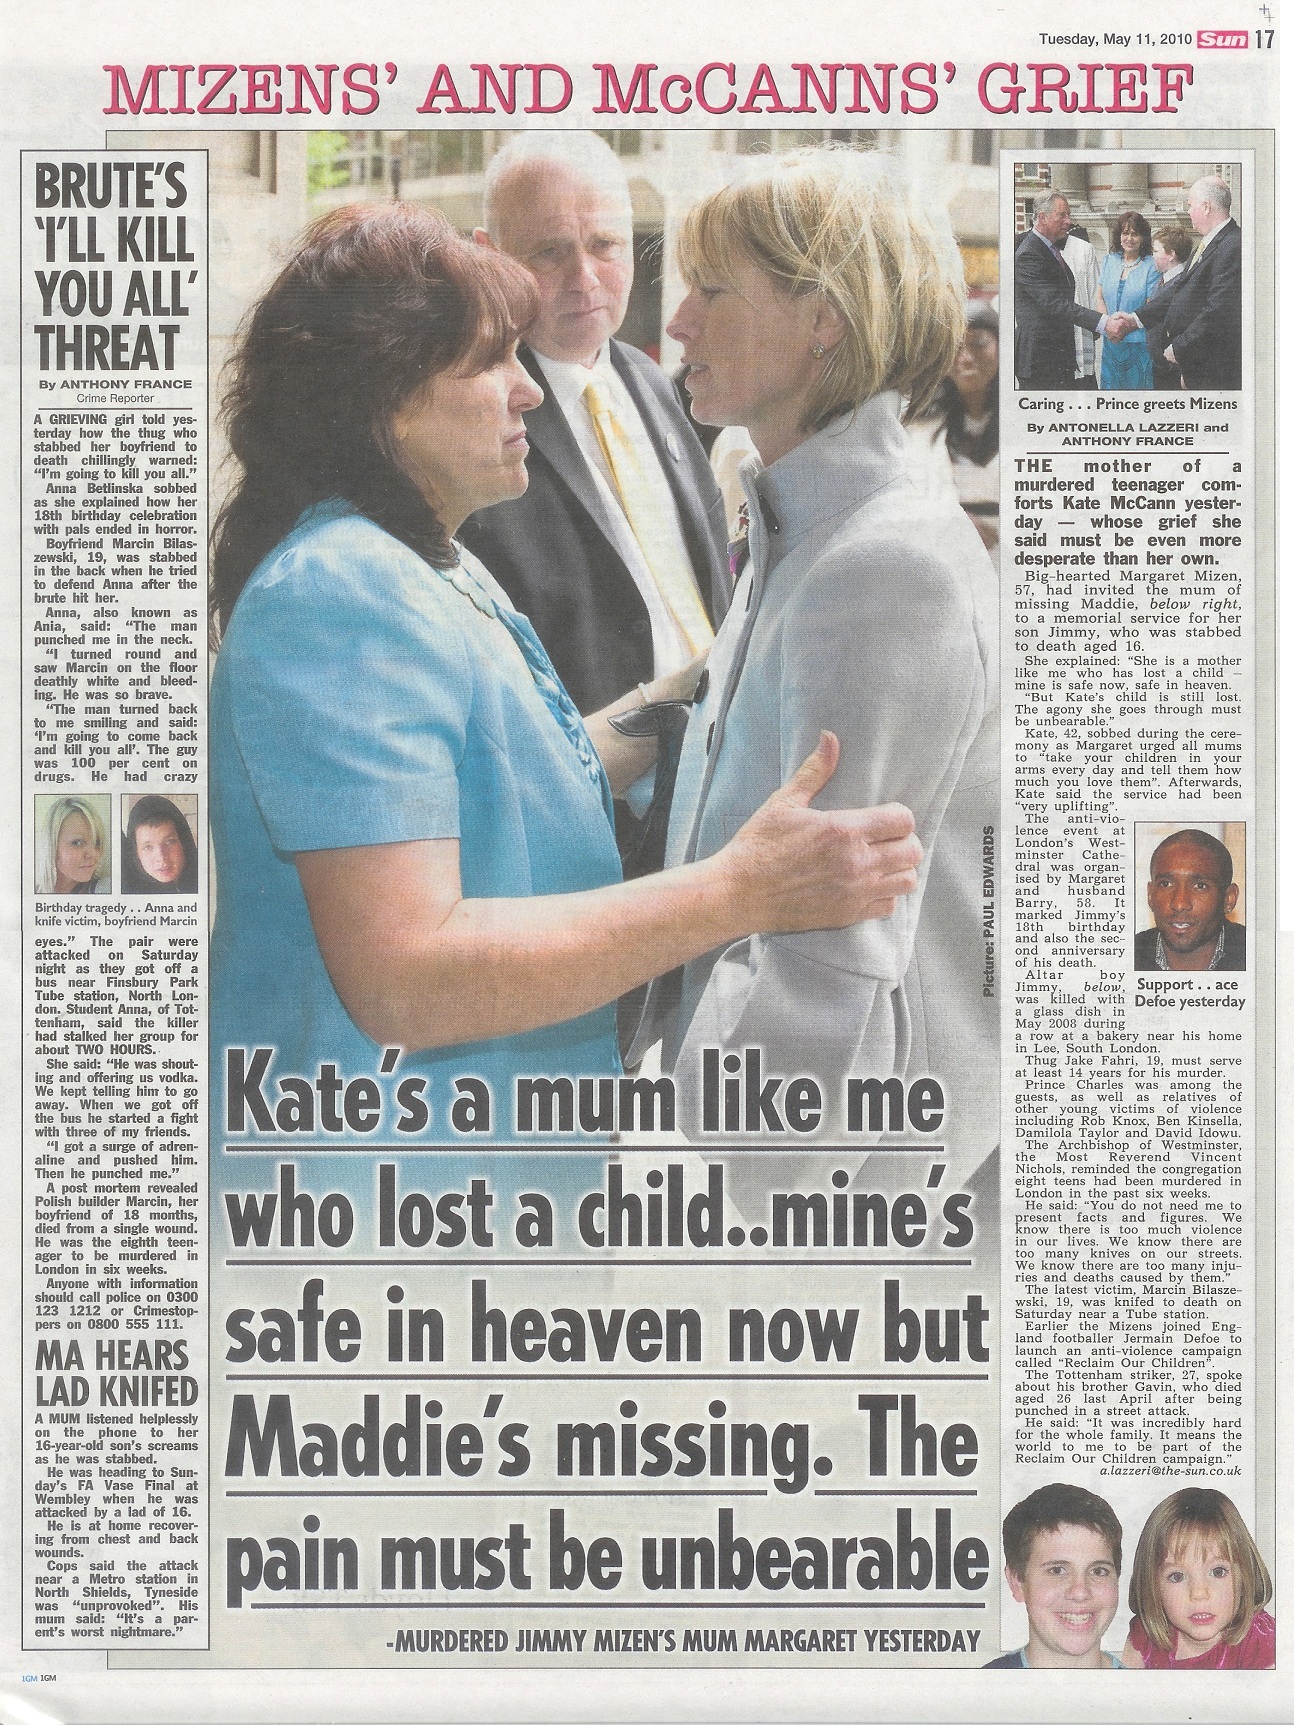 The Sun: 'Mizens' and McCanns' grief', 11 May 2010